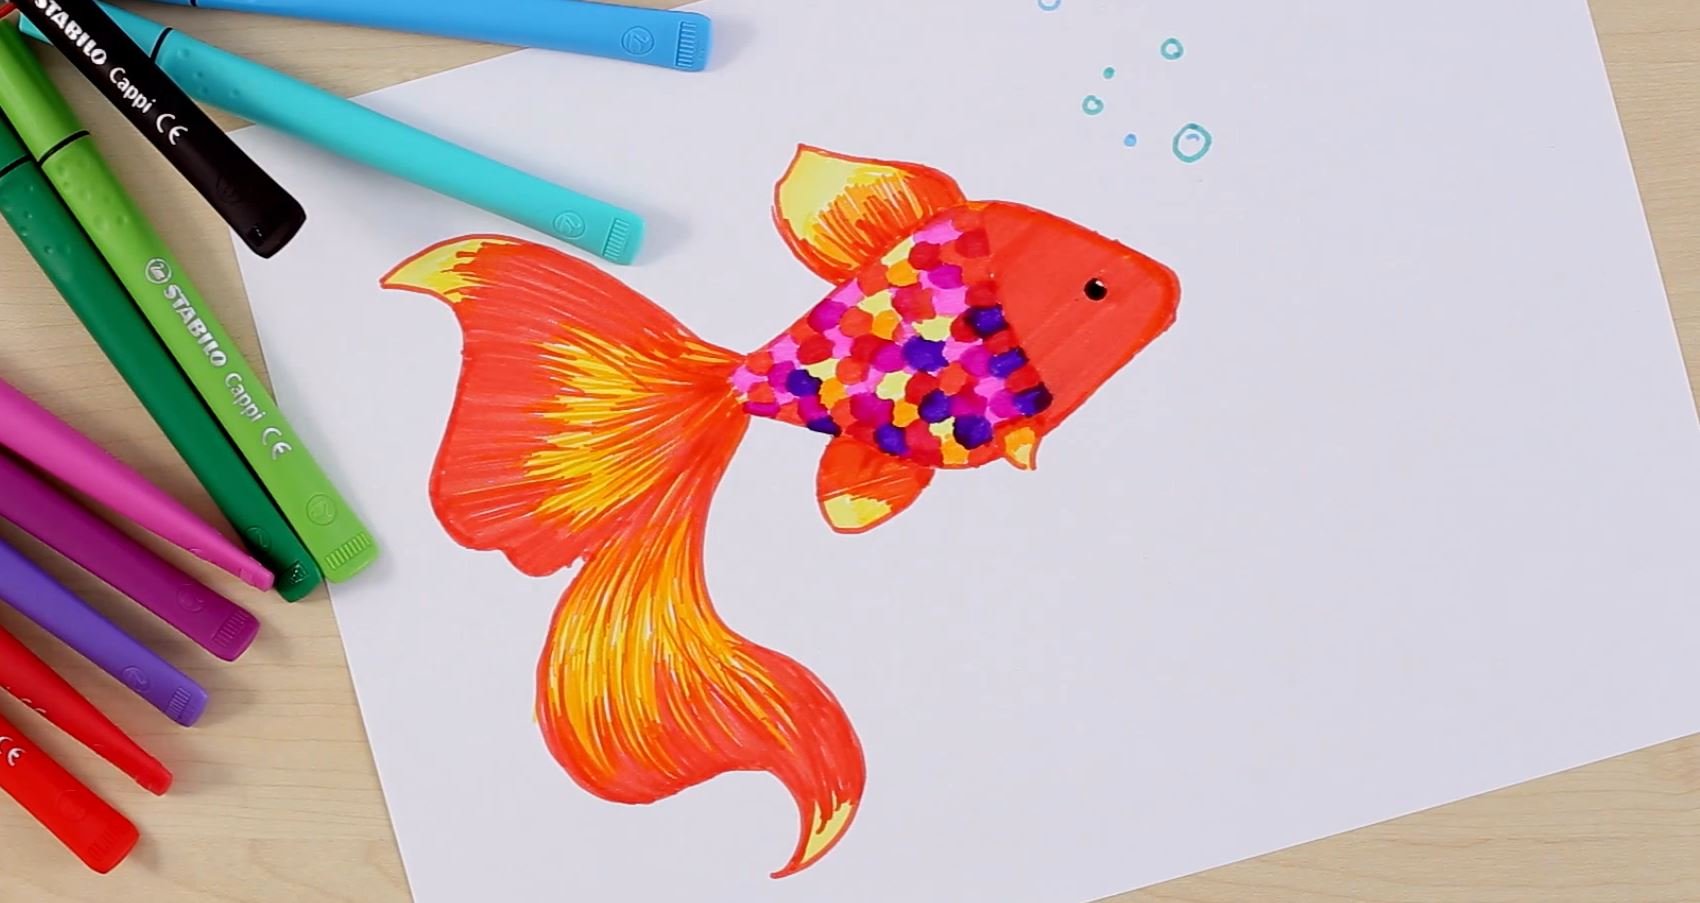 Pencil Drawings for Kids! Learn to Draw Colorful Pencils Easy Art